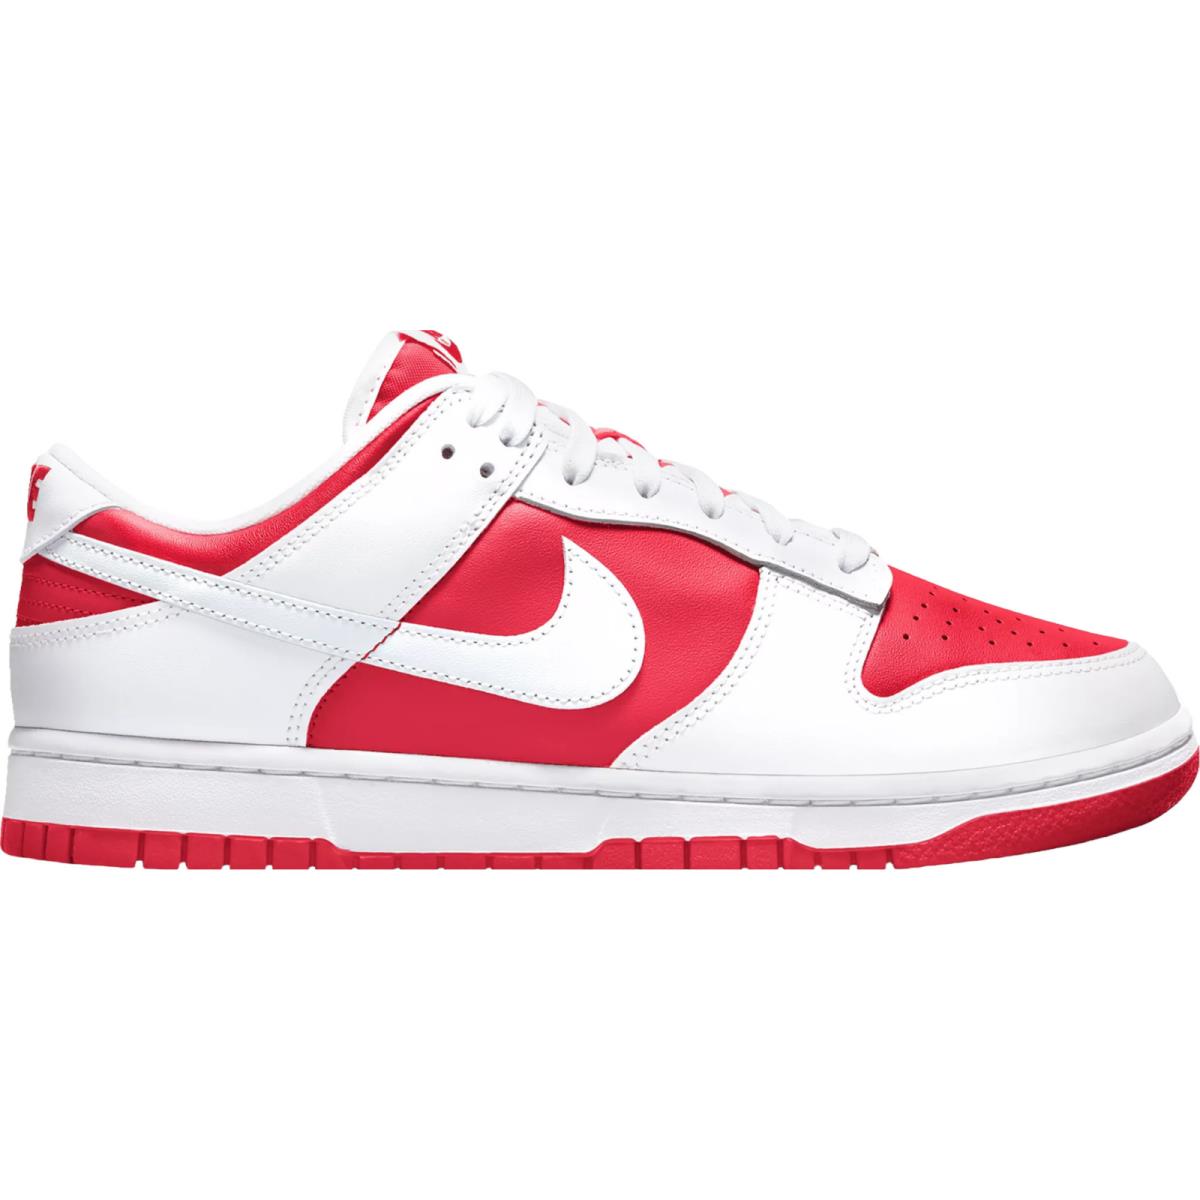 Nike Dunk Low Retro Men`s Casual Shoes All Colors US Sizes 7-14 University Red/White/Total Orange